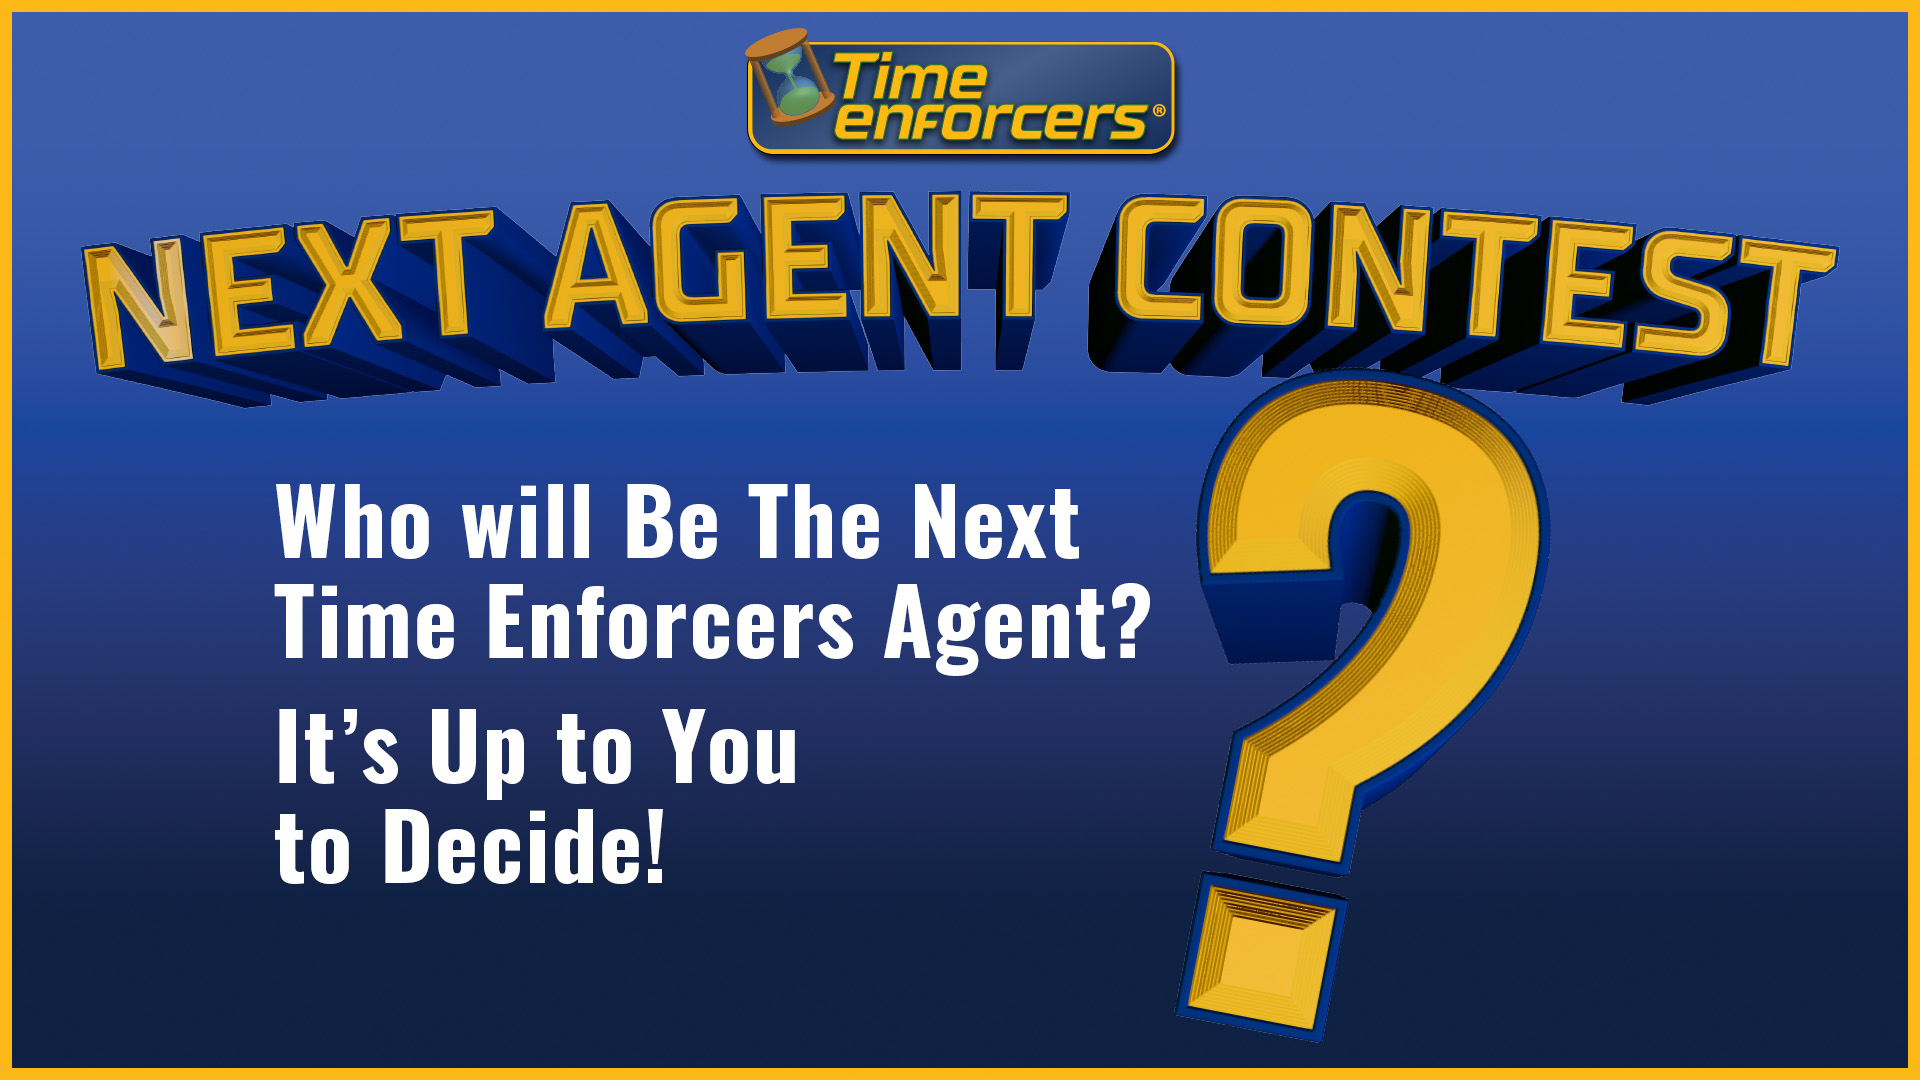 Who will be the Next Time Enforcers Agent